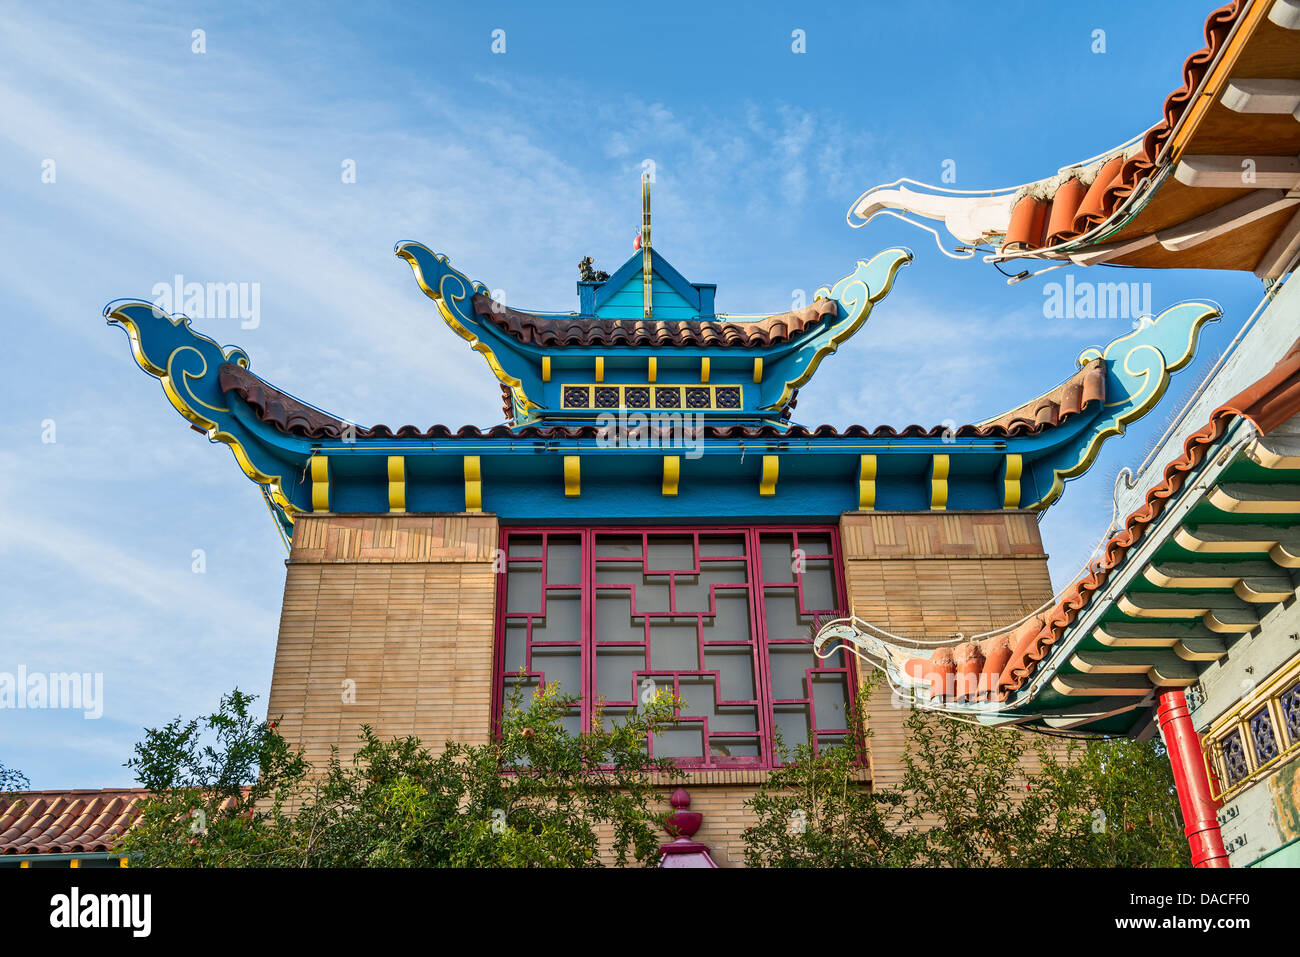 Asian themed buildings in Los Angeles Chinatown. Stock Photo